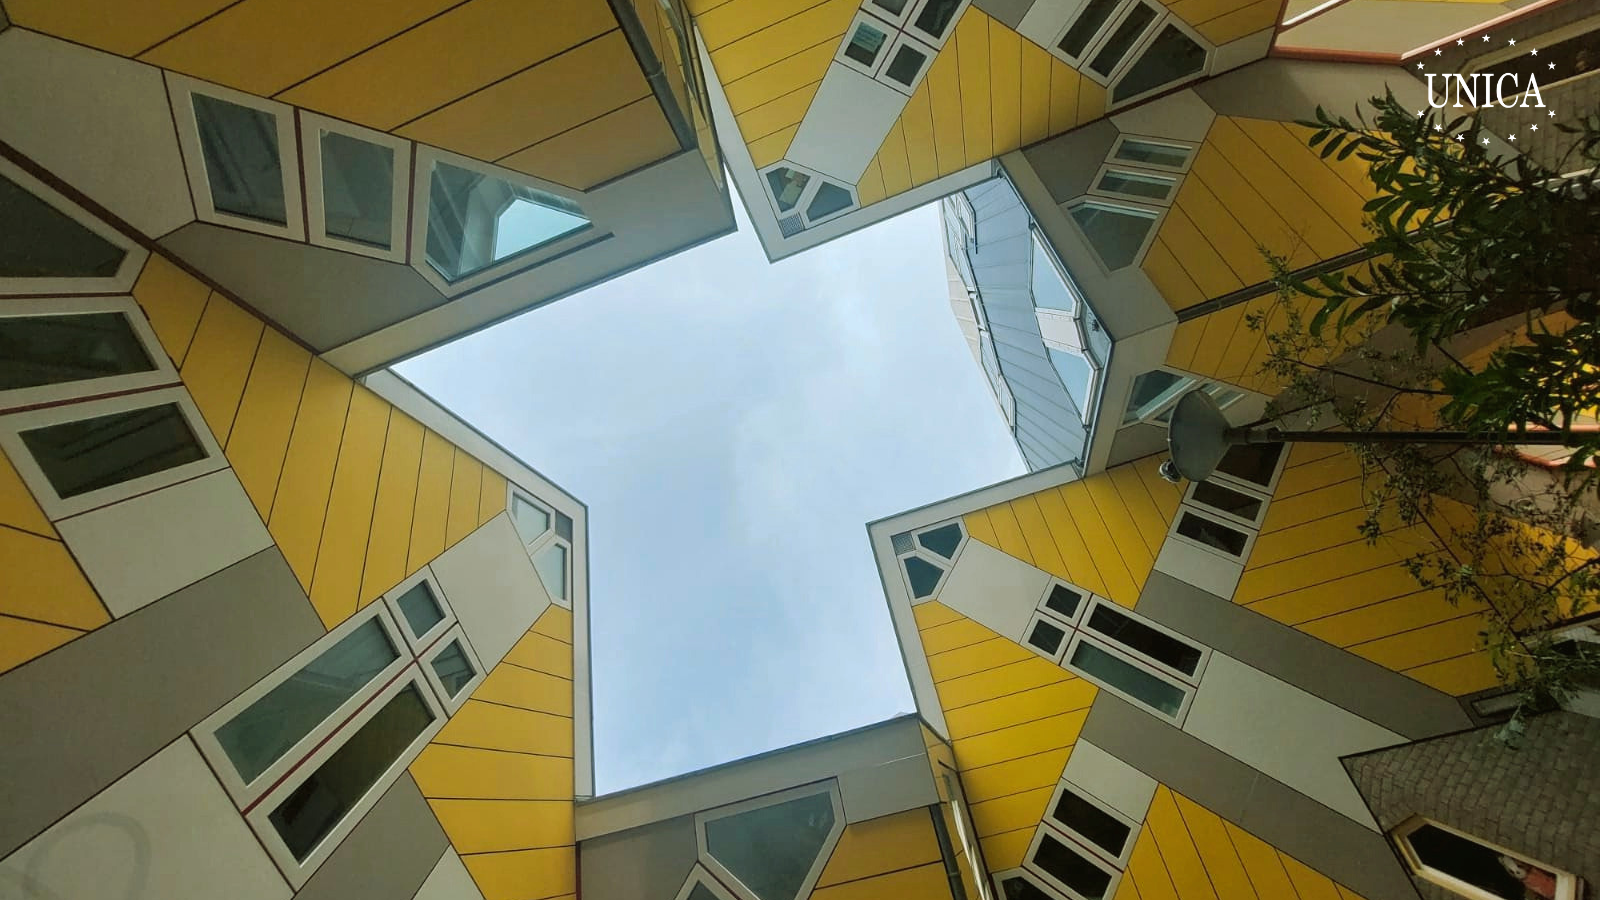 Creative view of a group of yellow houses in Rotterdam. Sky is seen in the middle.